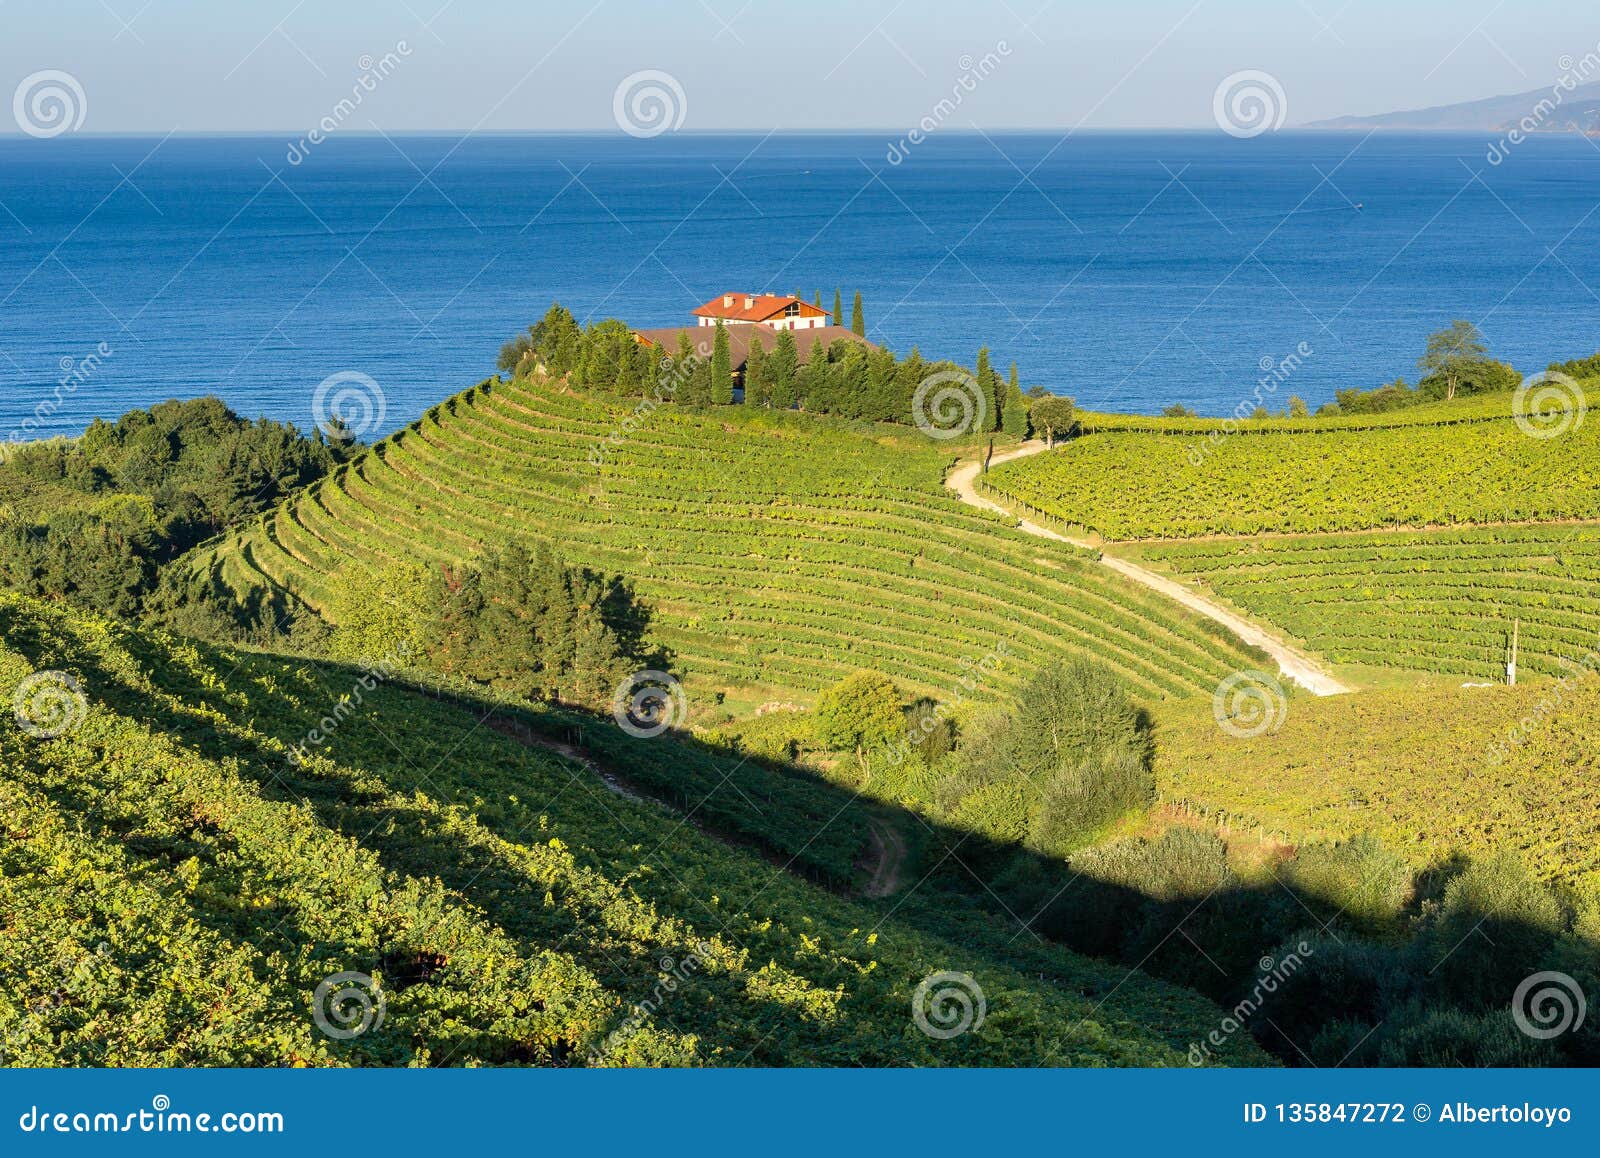 txakoli vineyards with cantabrian sea in the background, basque country, spain